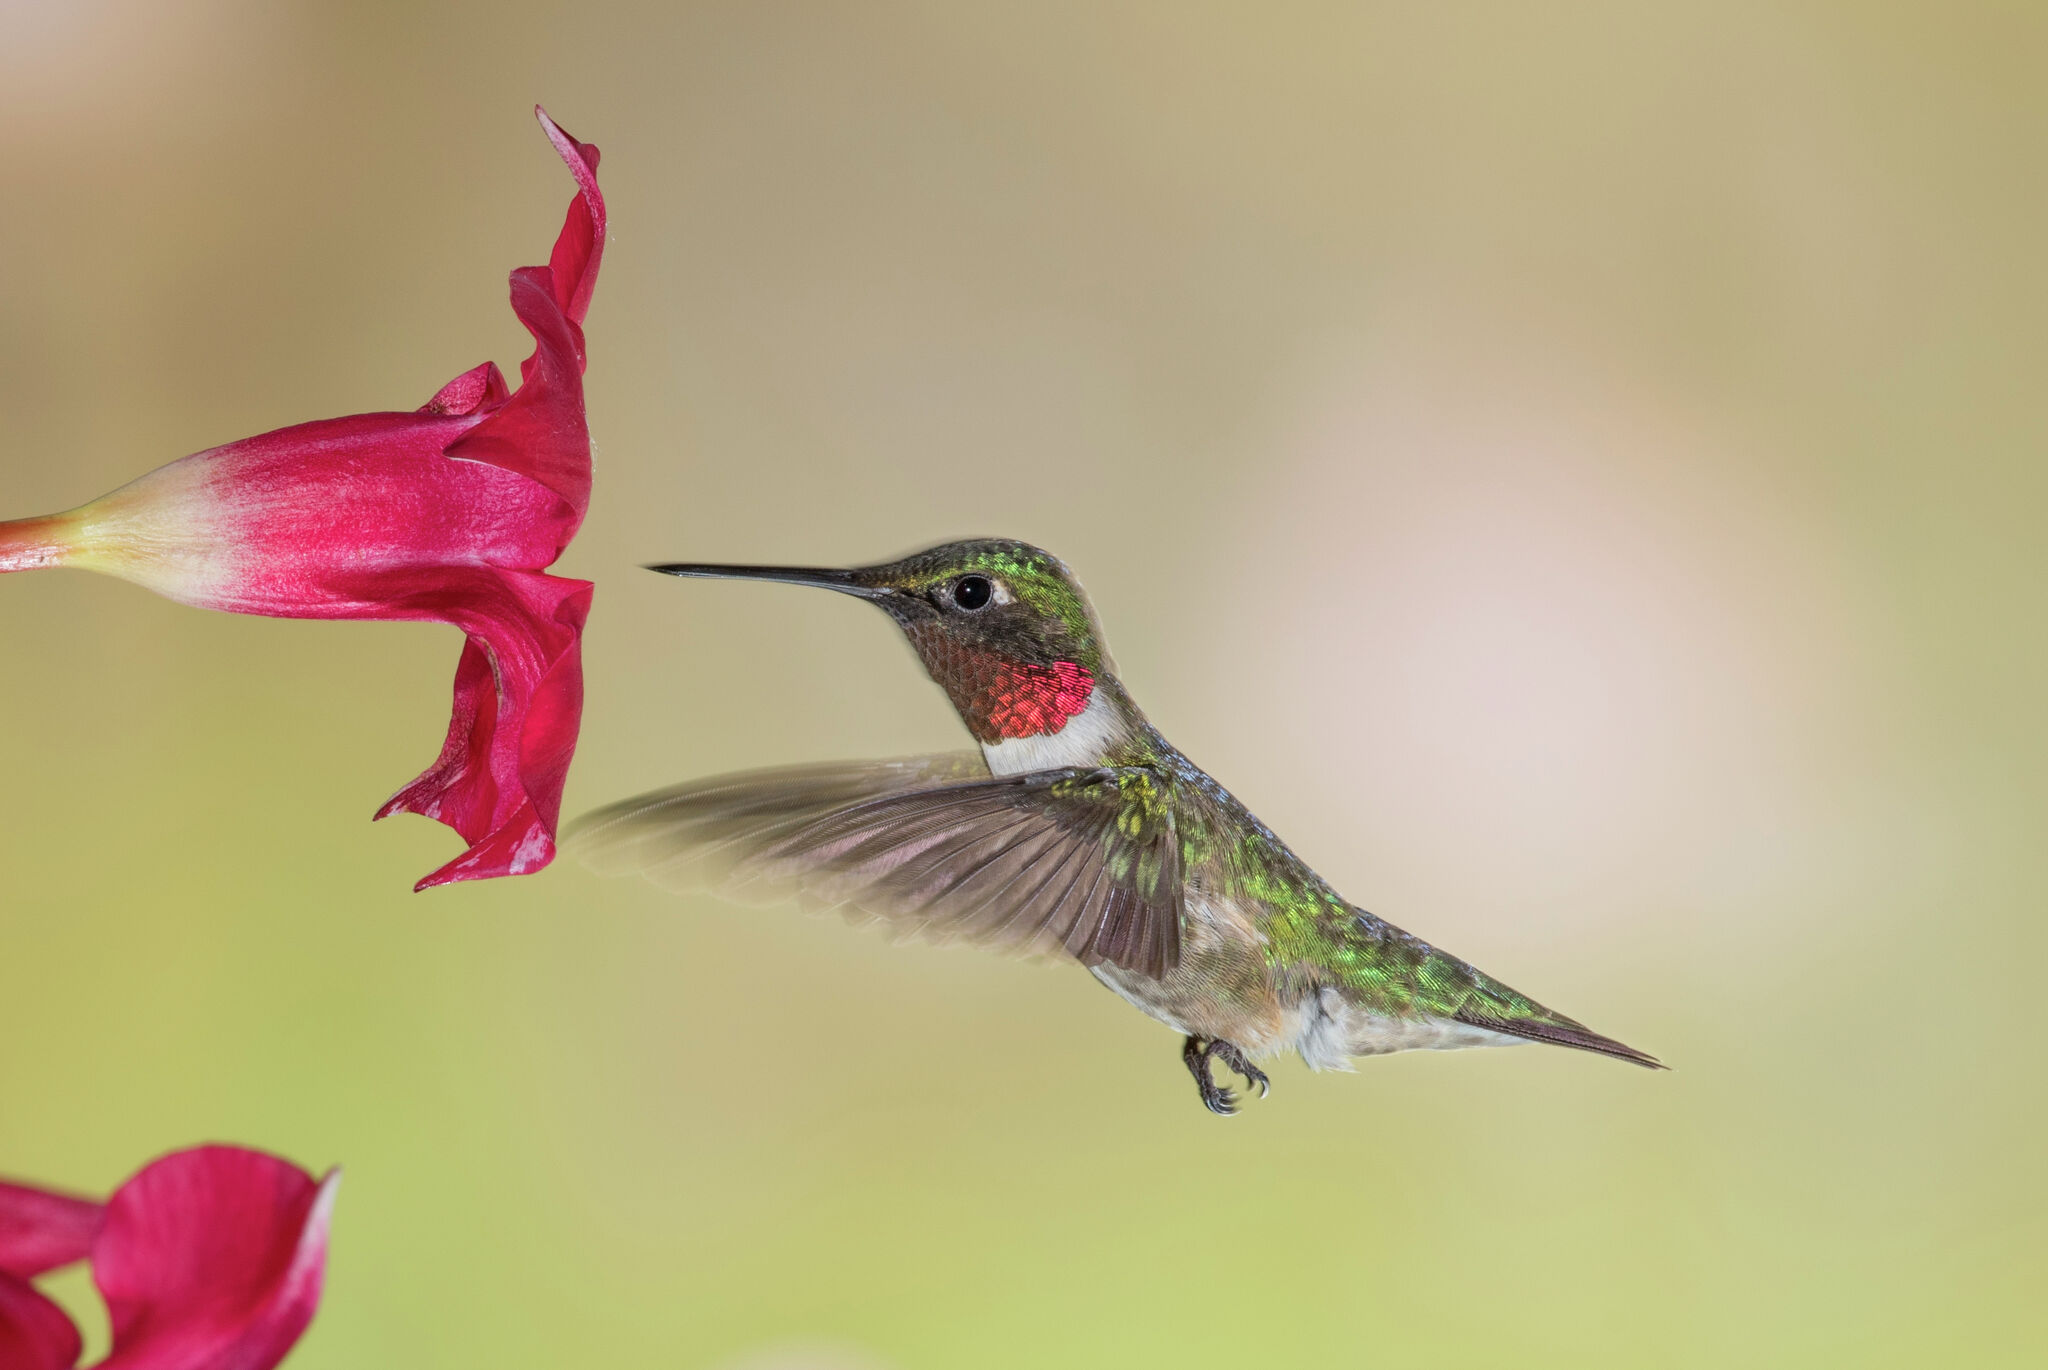 Michigan residents can attract hummingbirds with these flowers